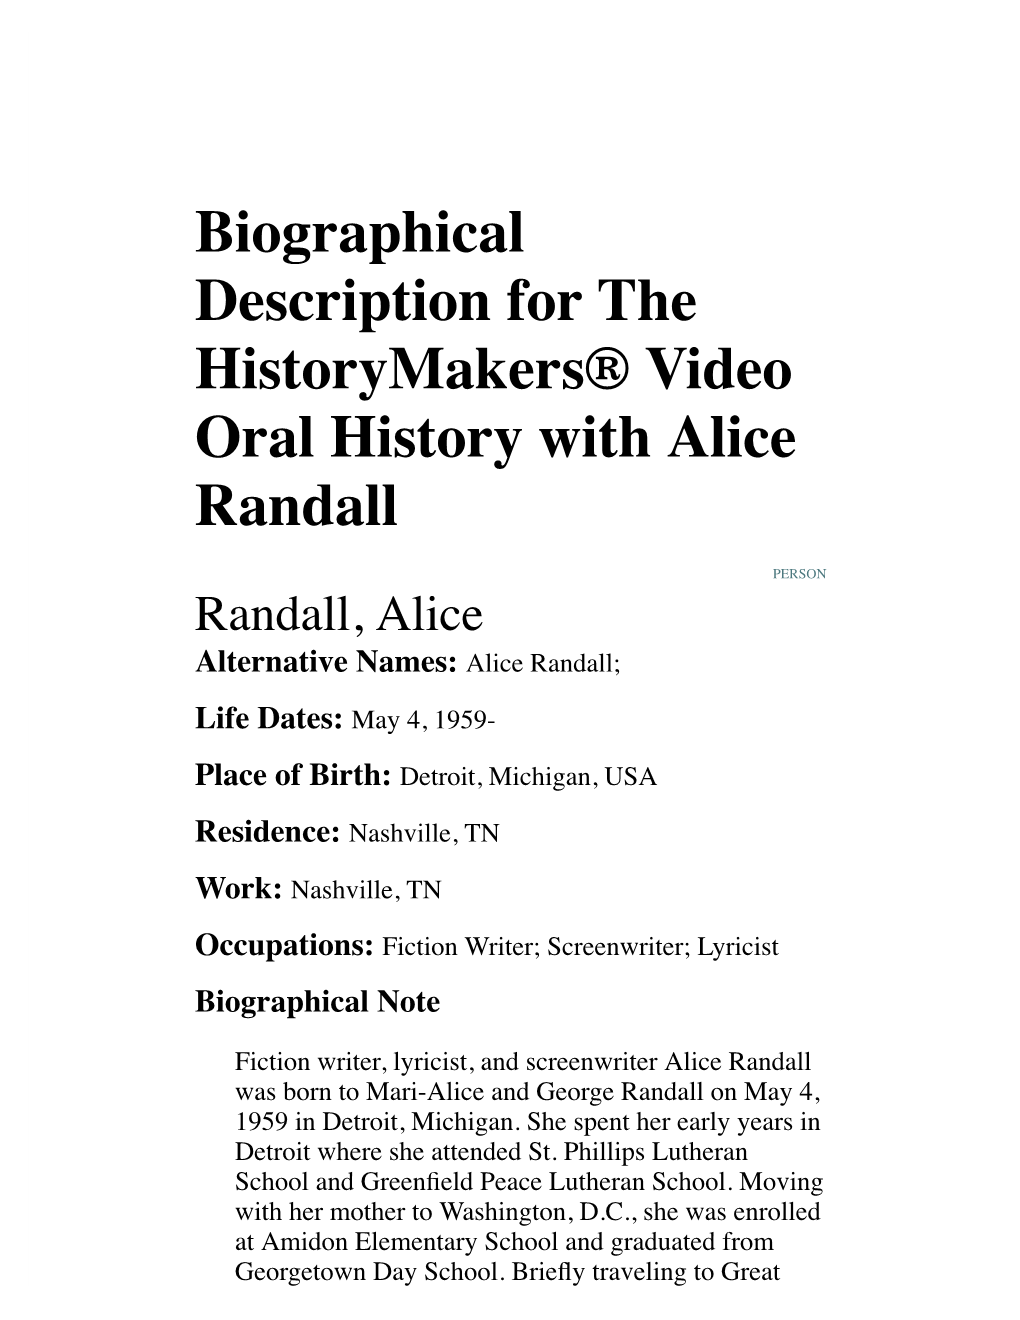 Biographical Description for the Historymakers® Video Oral History with Alice Randall